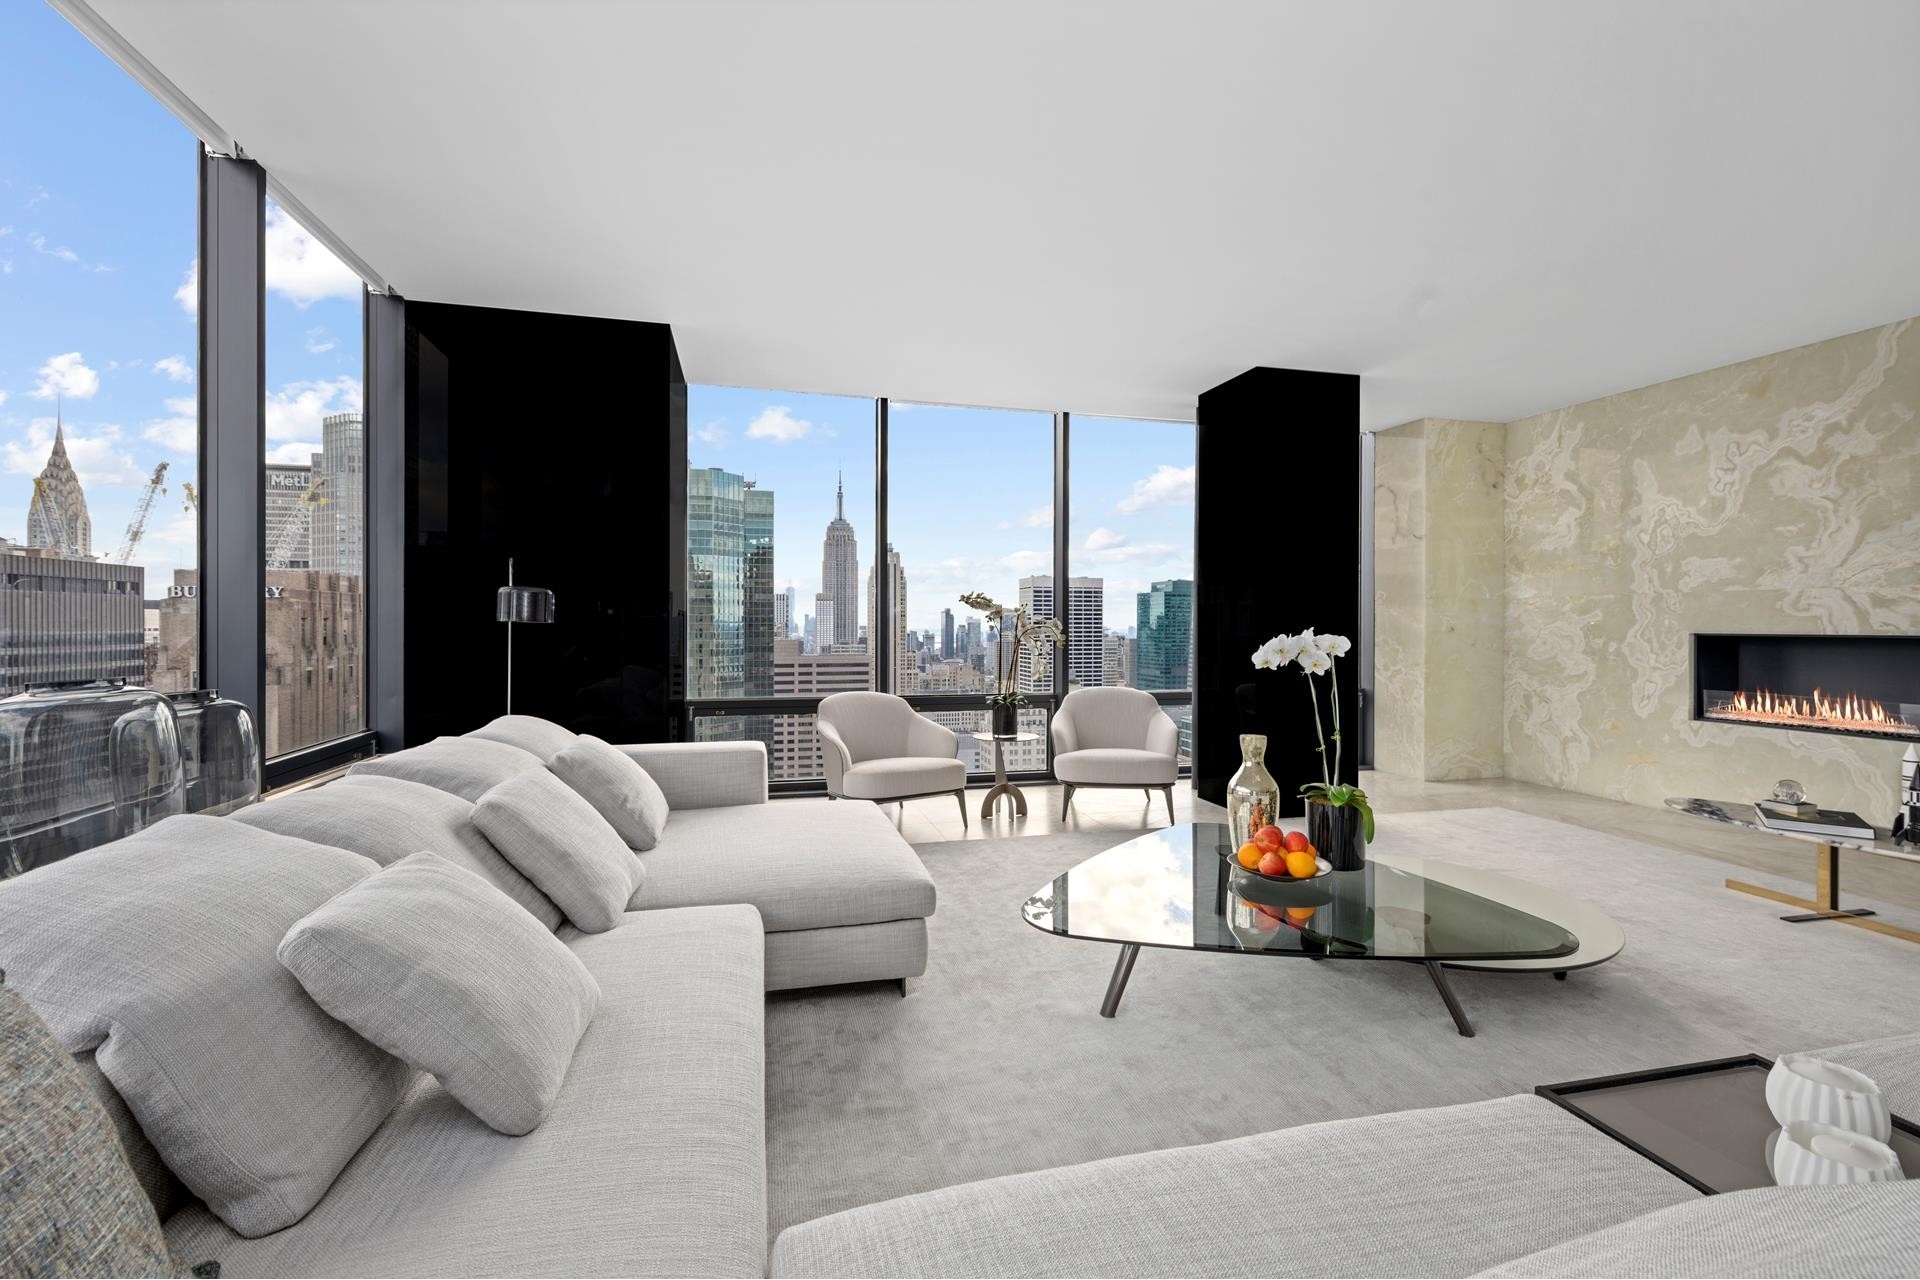 Condominium for Sale at Olympic Tower, 641 FIFTH AVE, 42DE Midtown East, New York, NY 10022